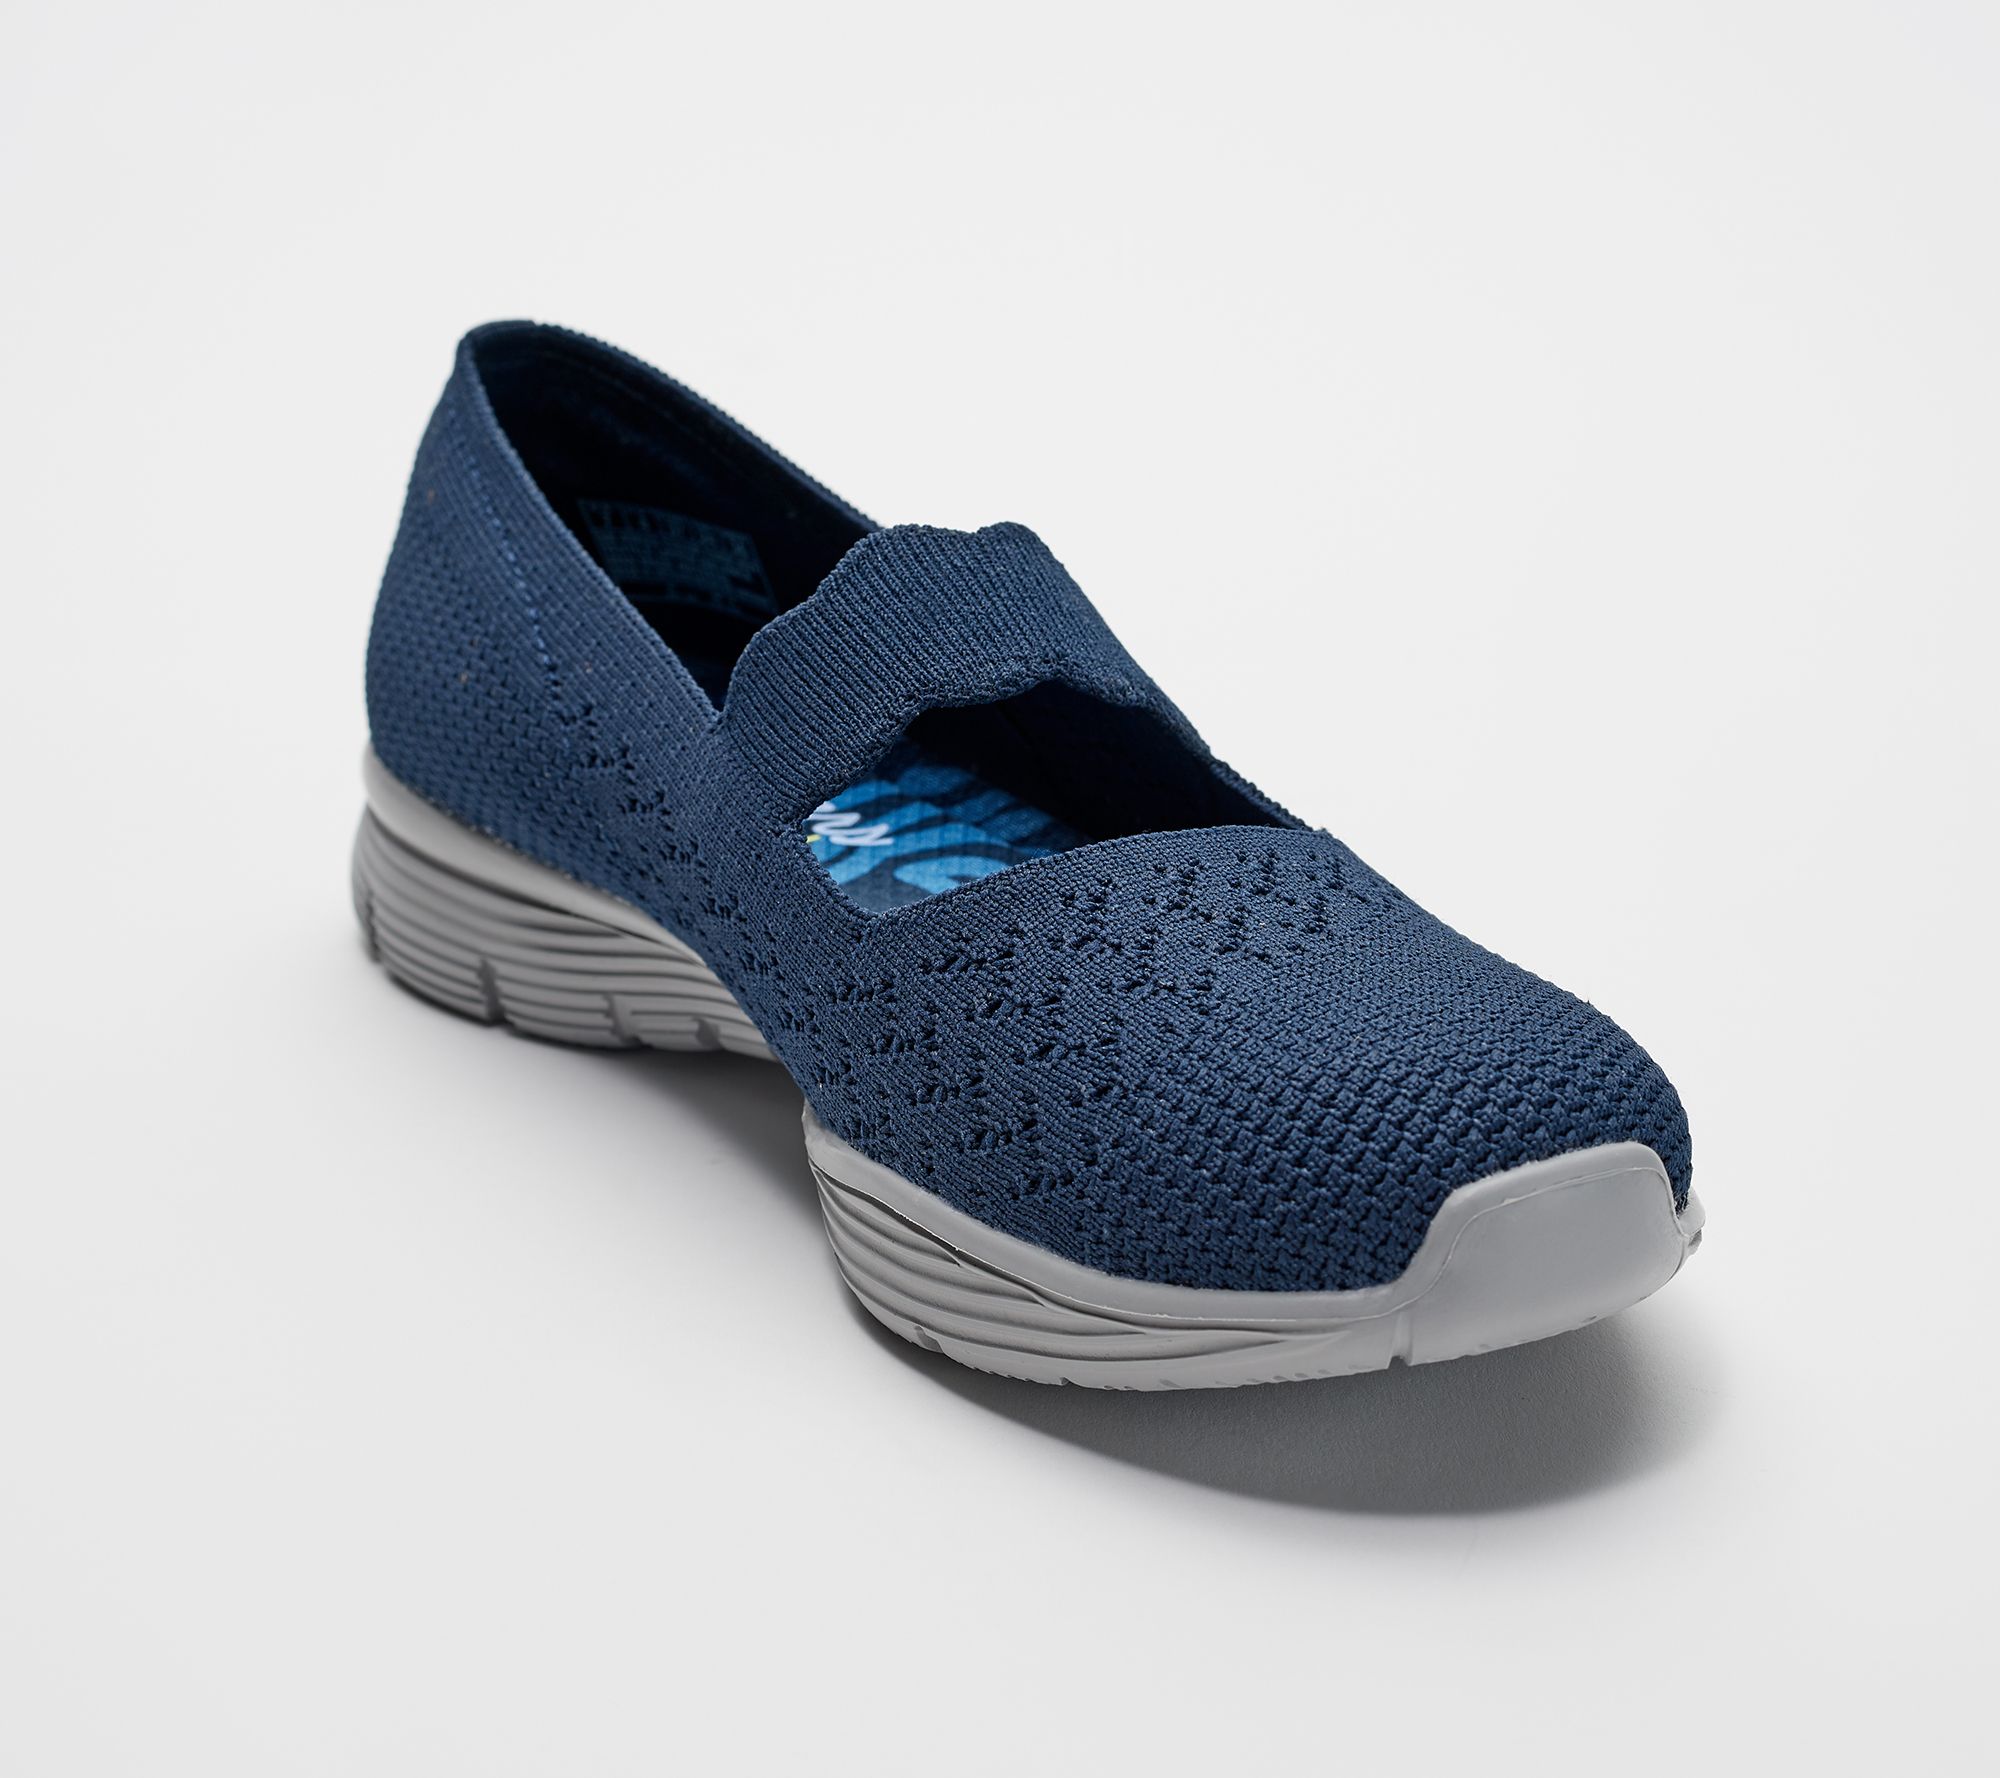 Skechers Flat-Knit Mary - Seager Power Hitter - QVC.com